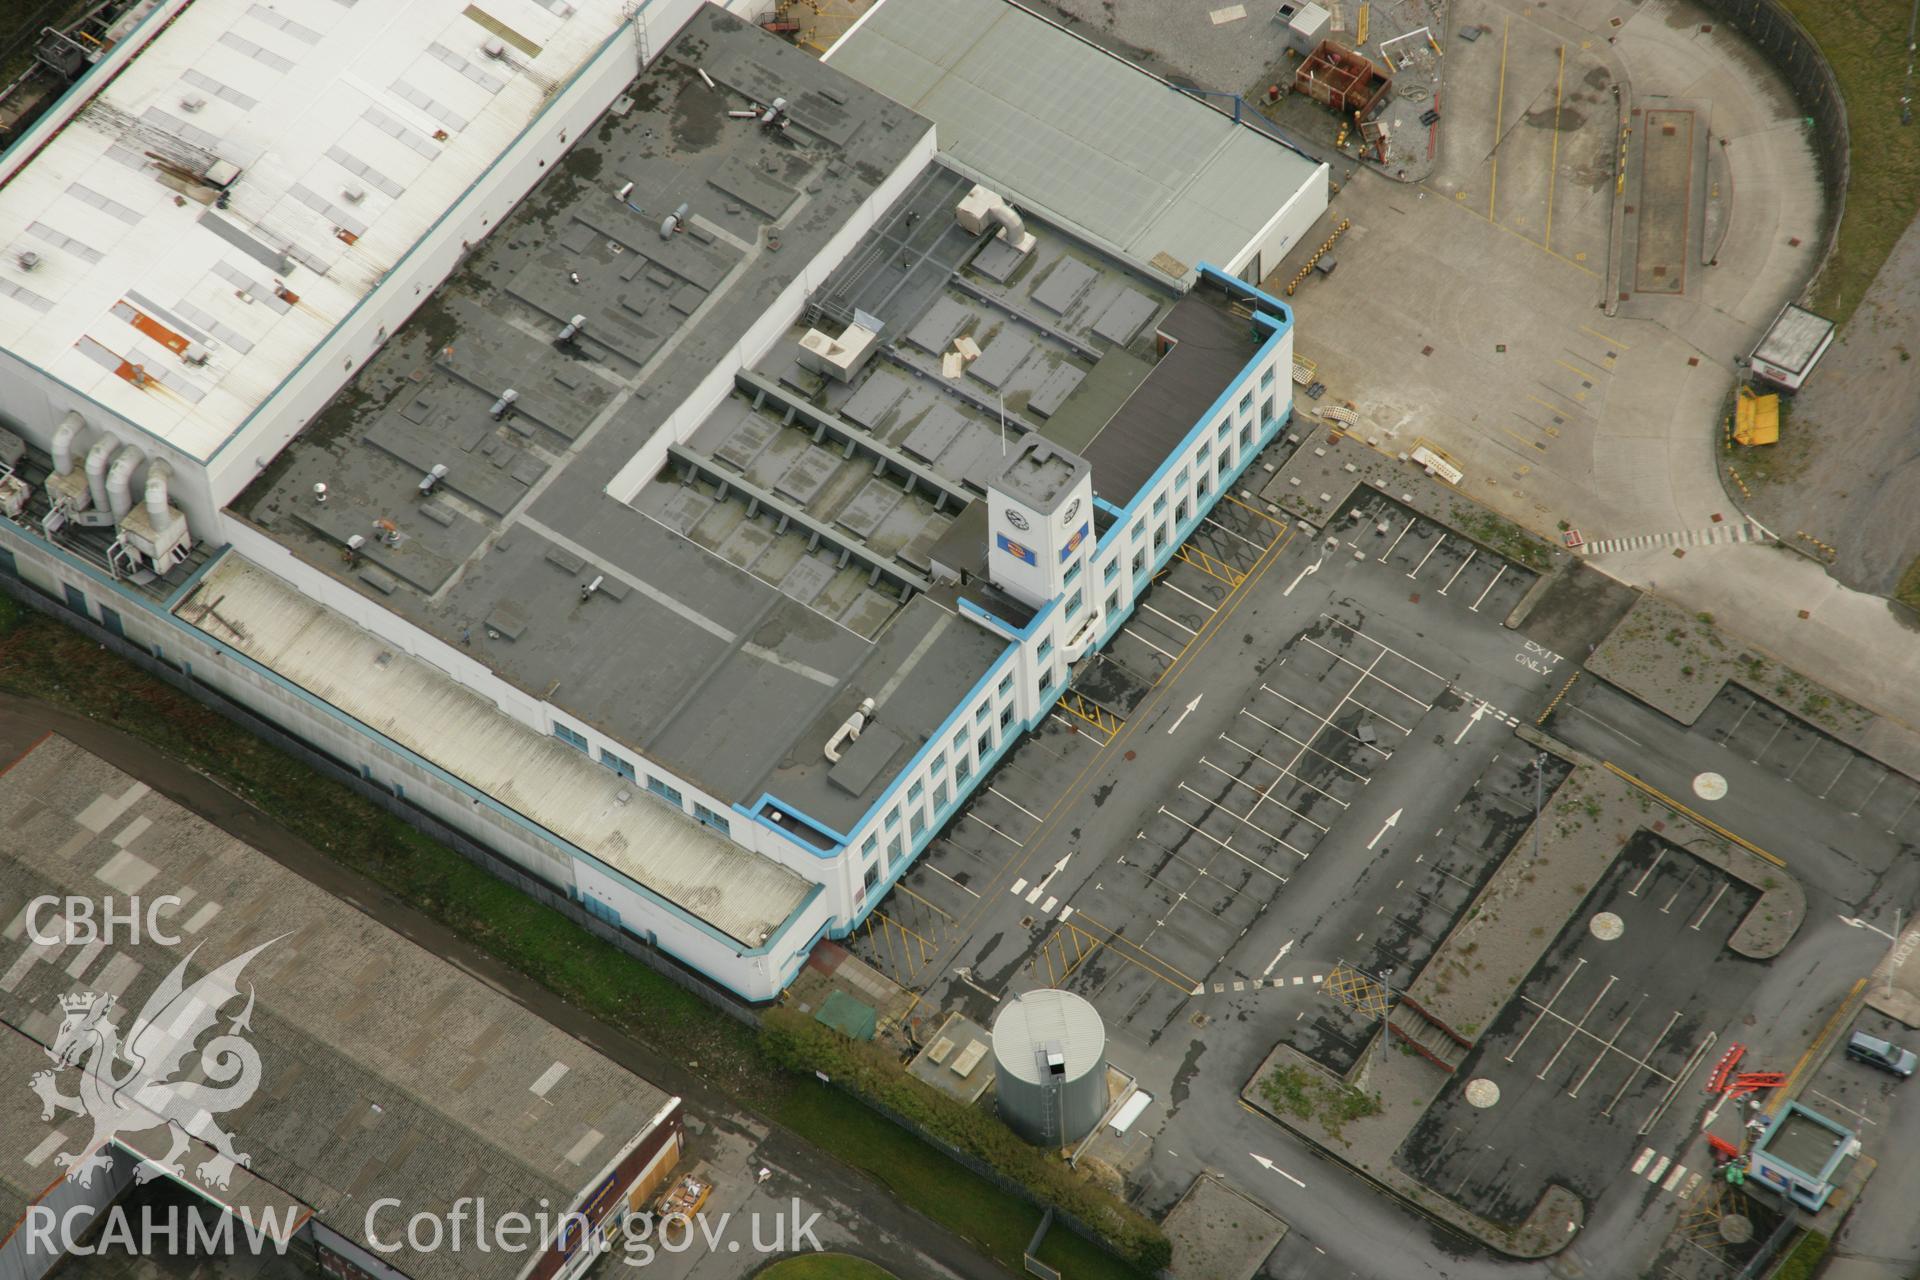 RCAHMW colour oblique aerial photograph of Walkers Snack Foods Ltd, Fforestfach. Taken on 16 March 2007 by Toby Driver